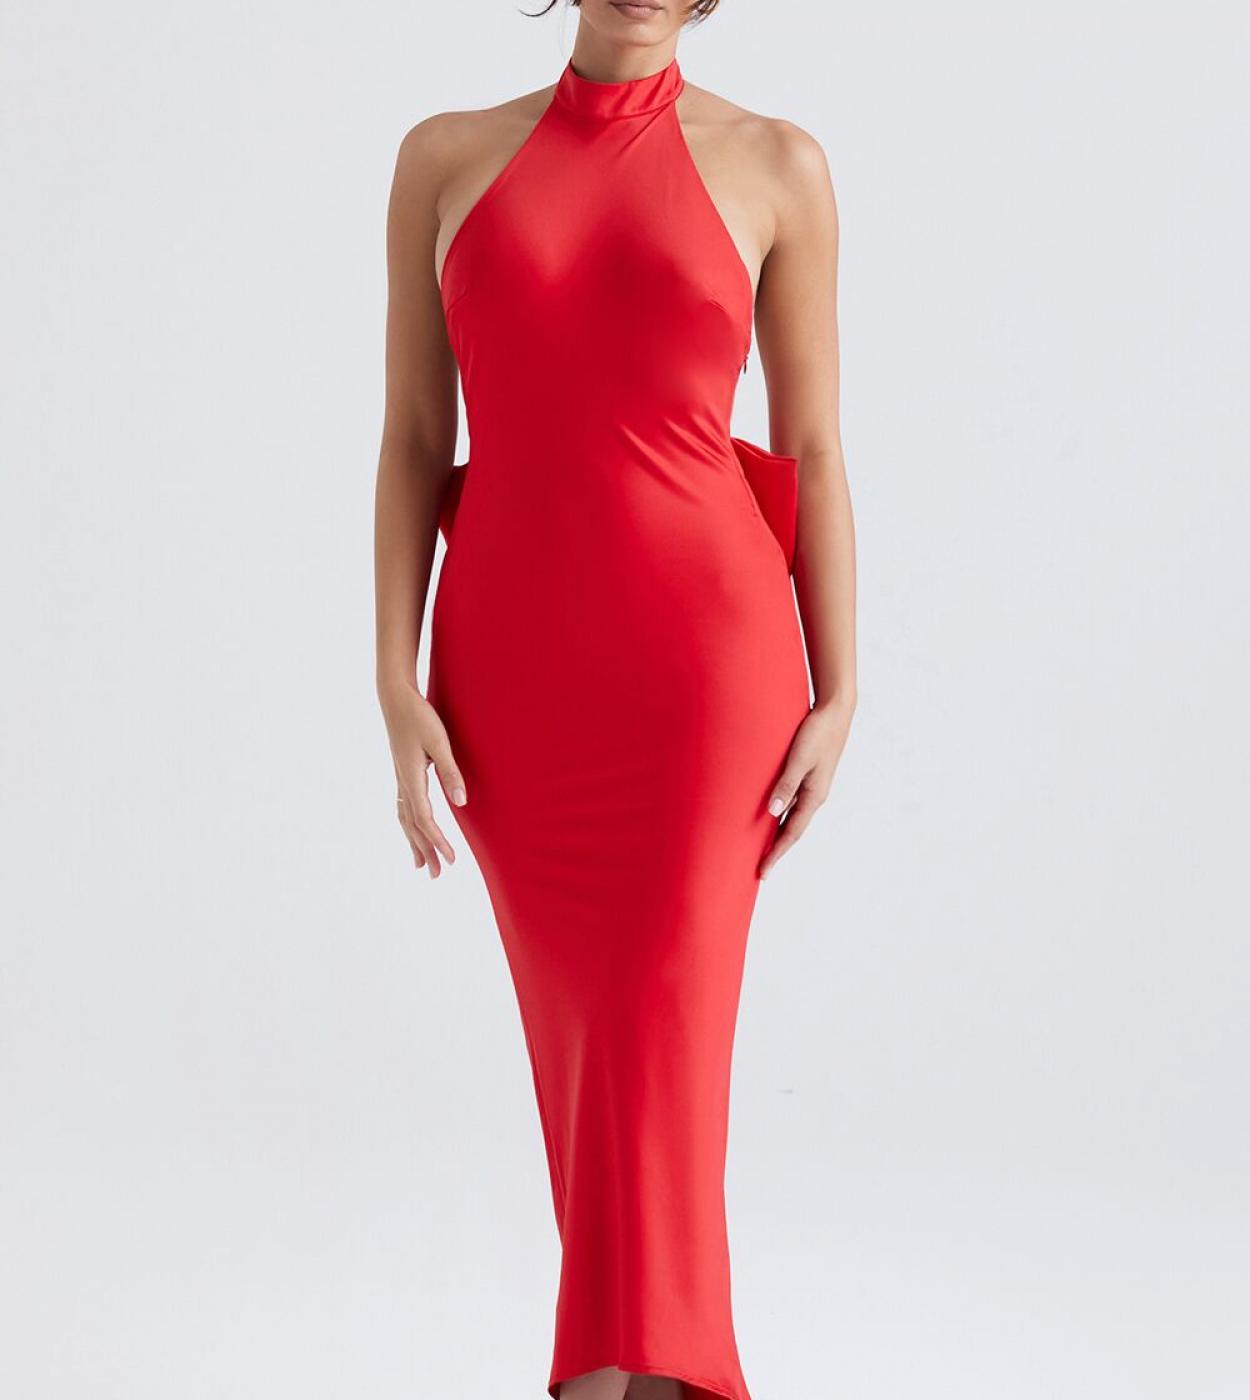 Ladys  Backless Bow Bandage Dress Sleeveless Red Neckmounted Bodycon Party Cocktail Party Evening Length Dresses  Dress